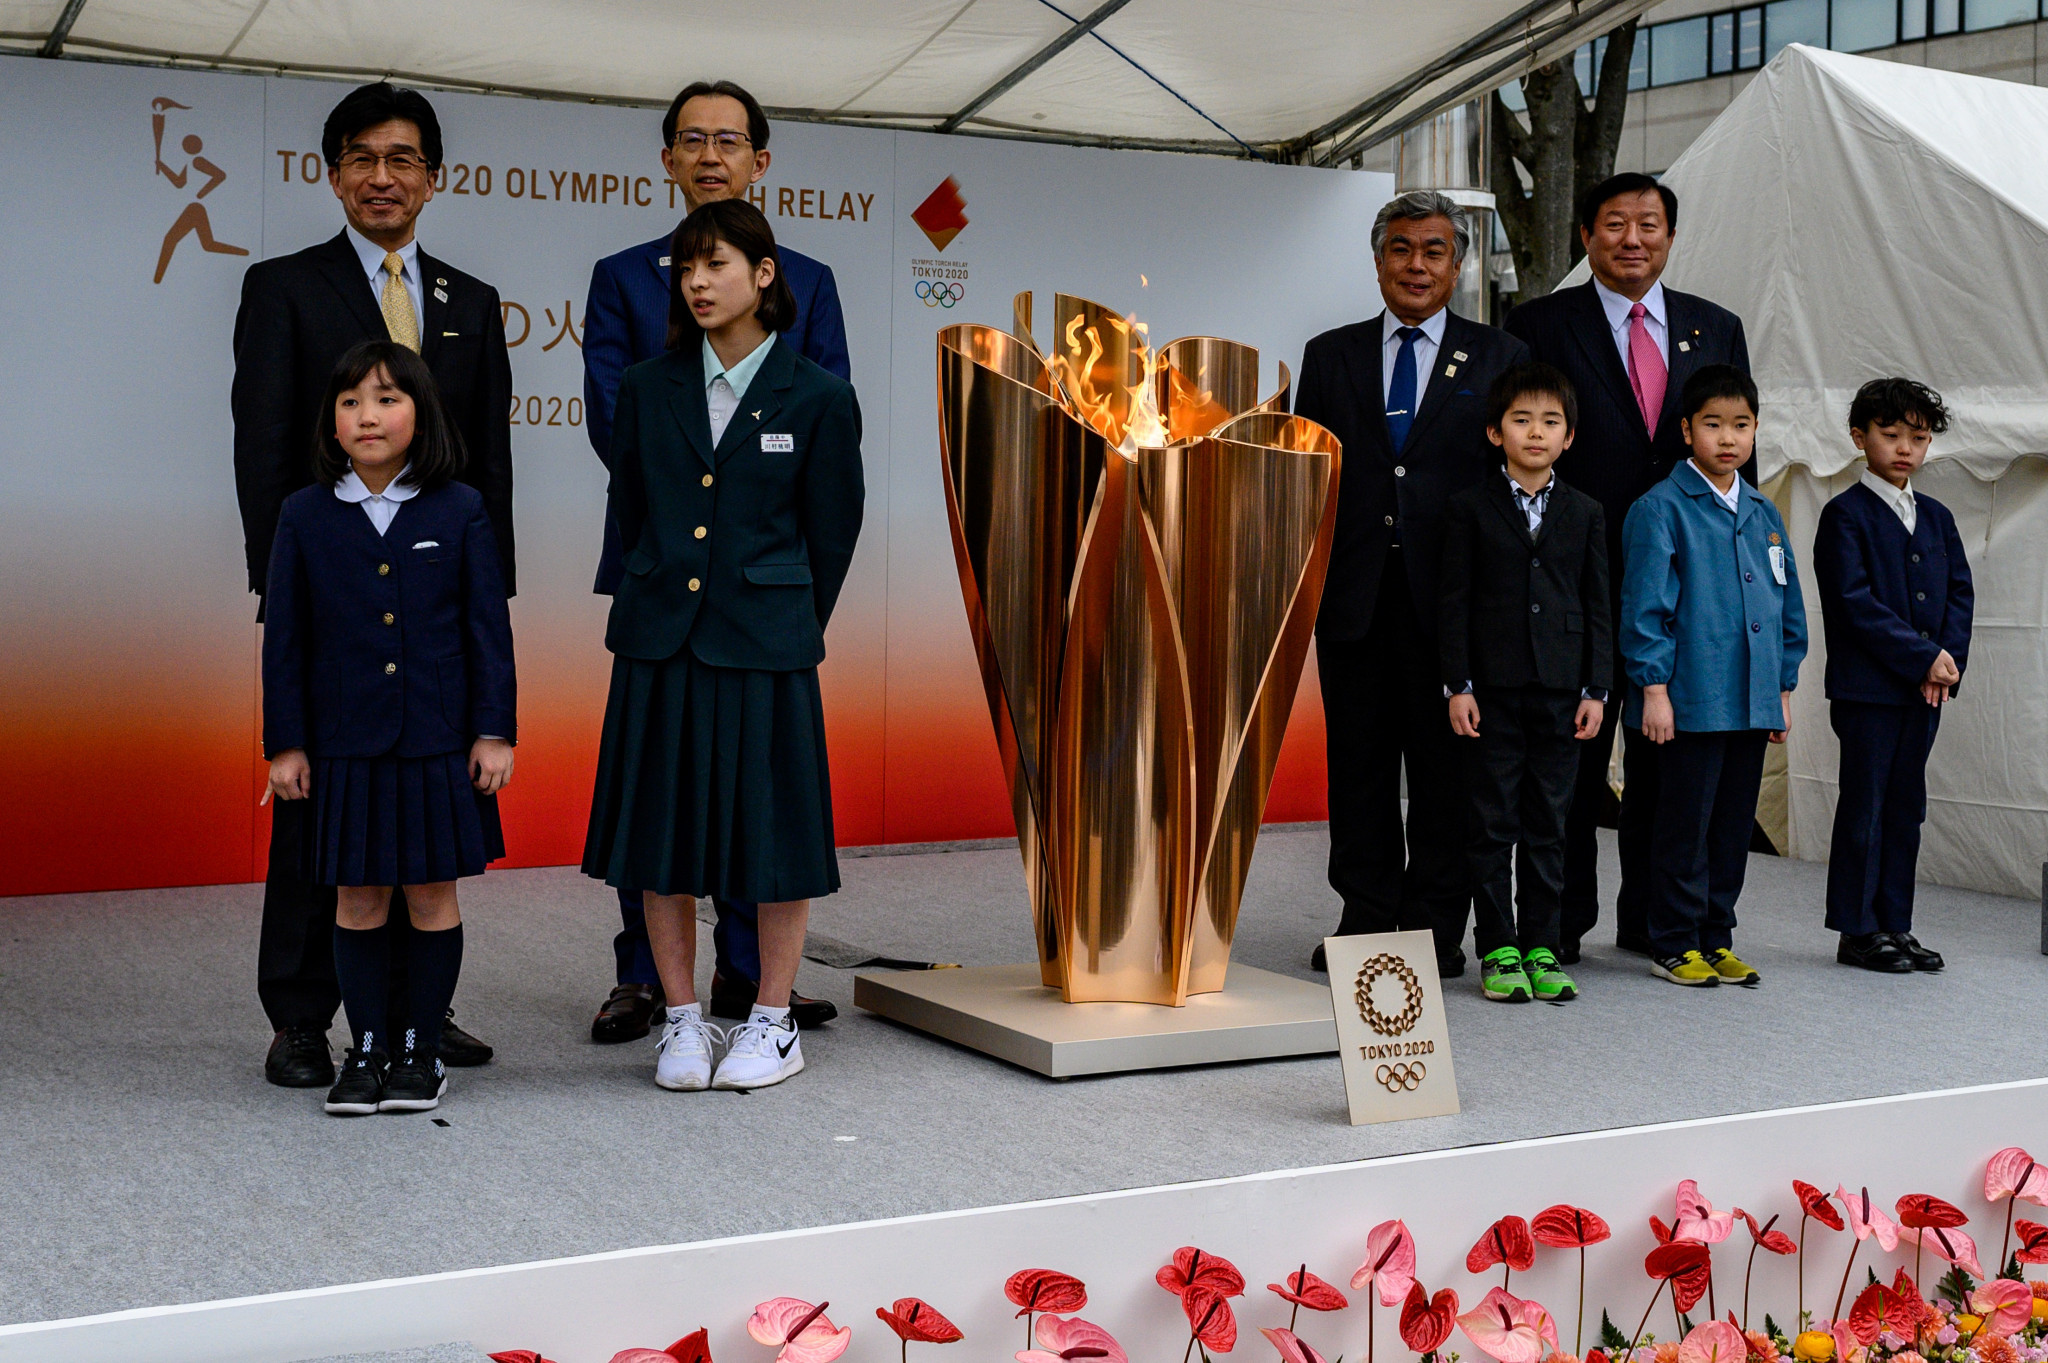 Events celebrating the Torch Relay may be scrapped by Tokyo 2020 organisers ©Getty Images